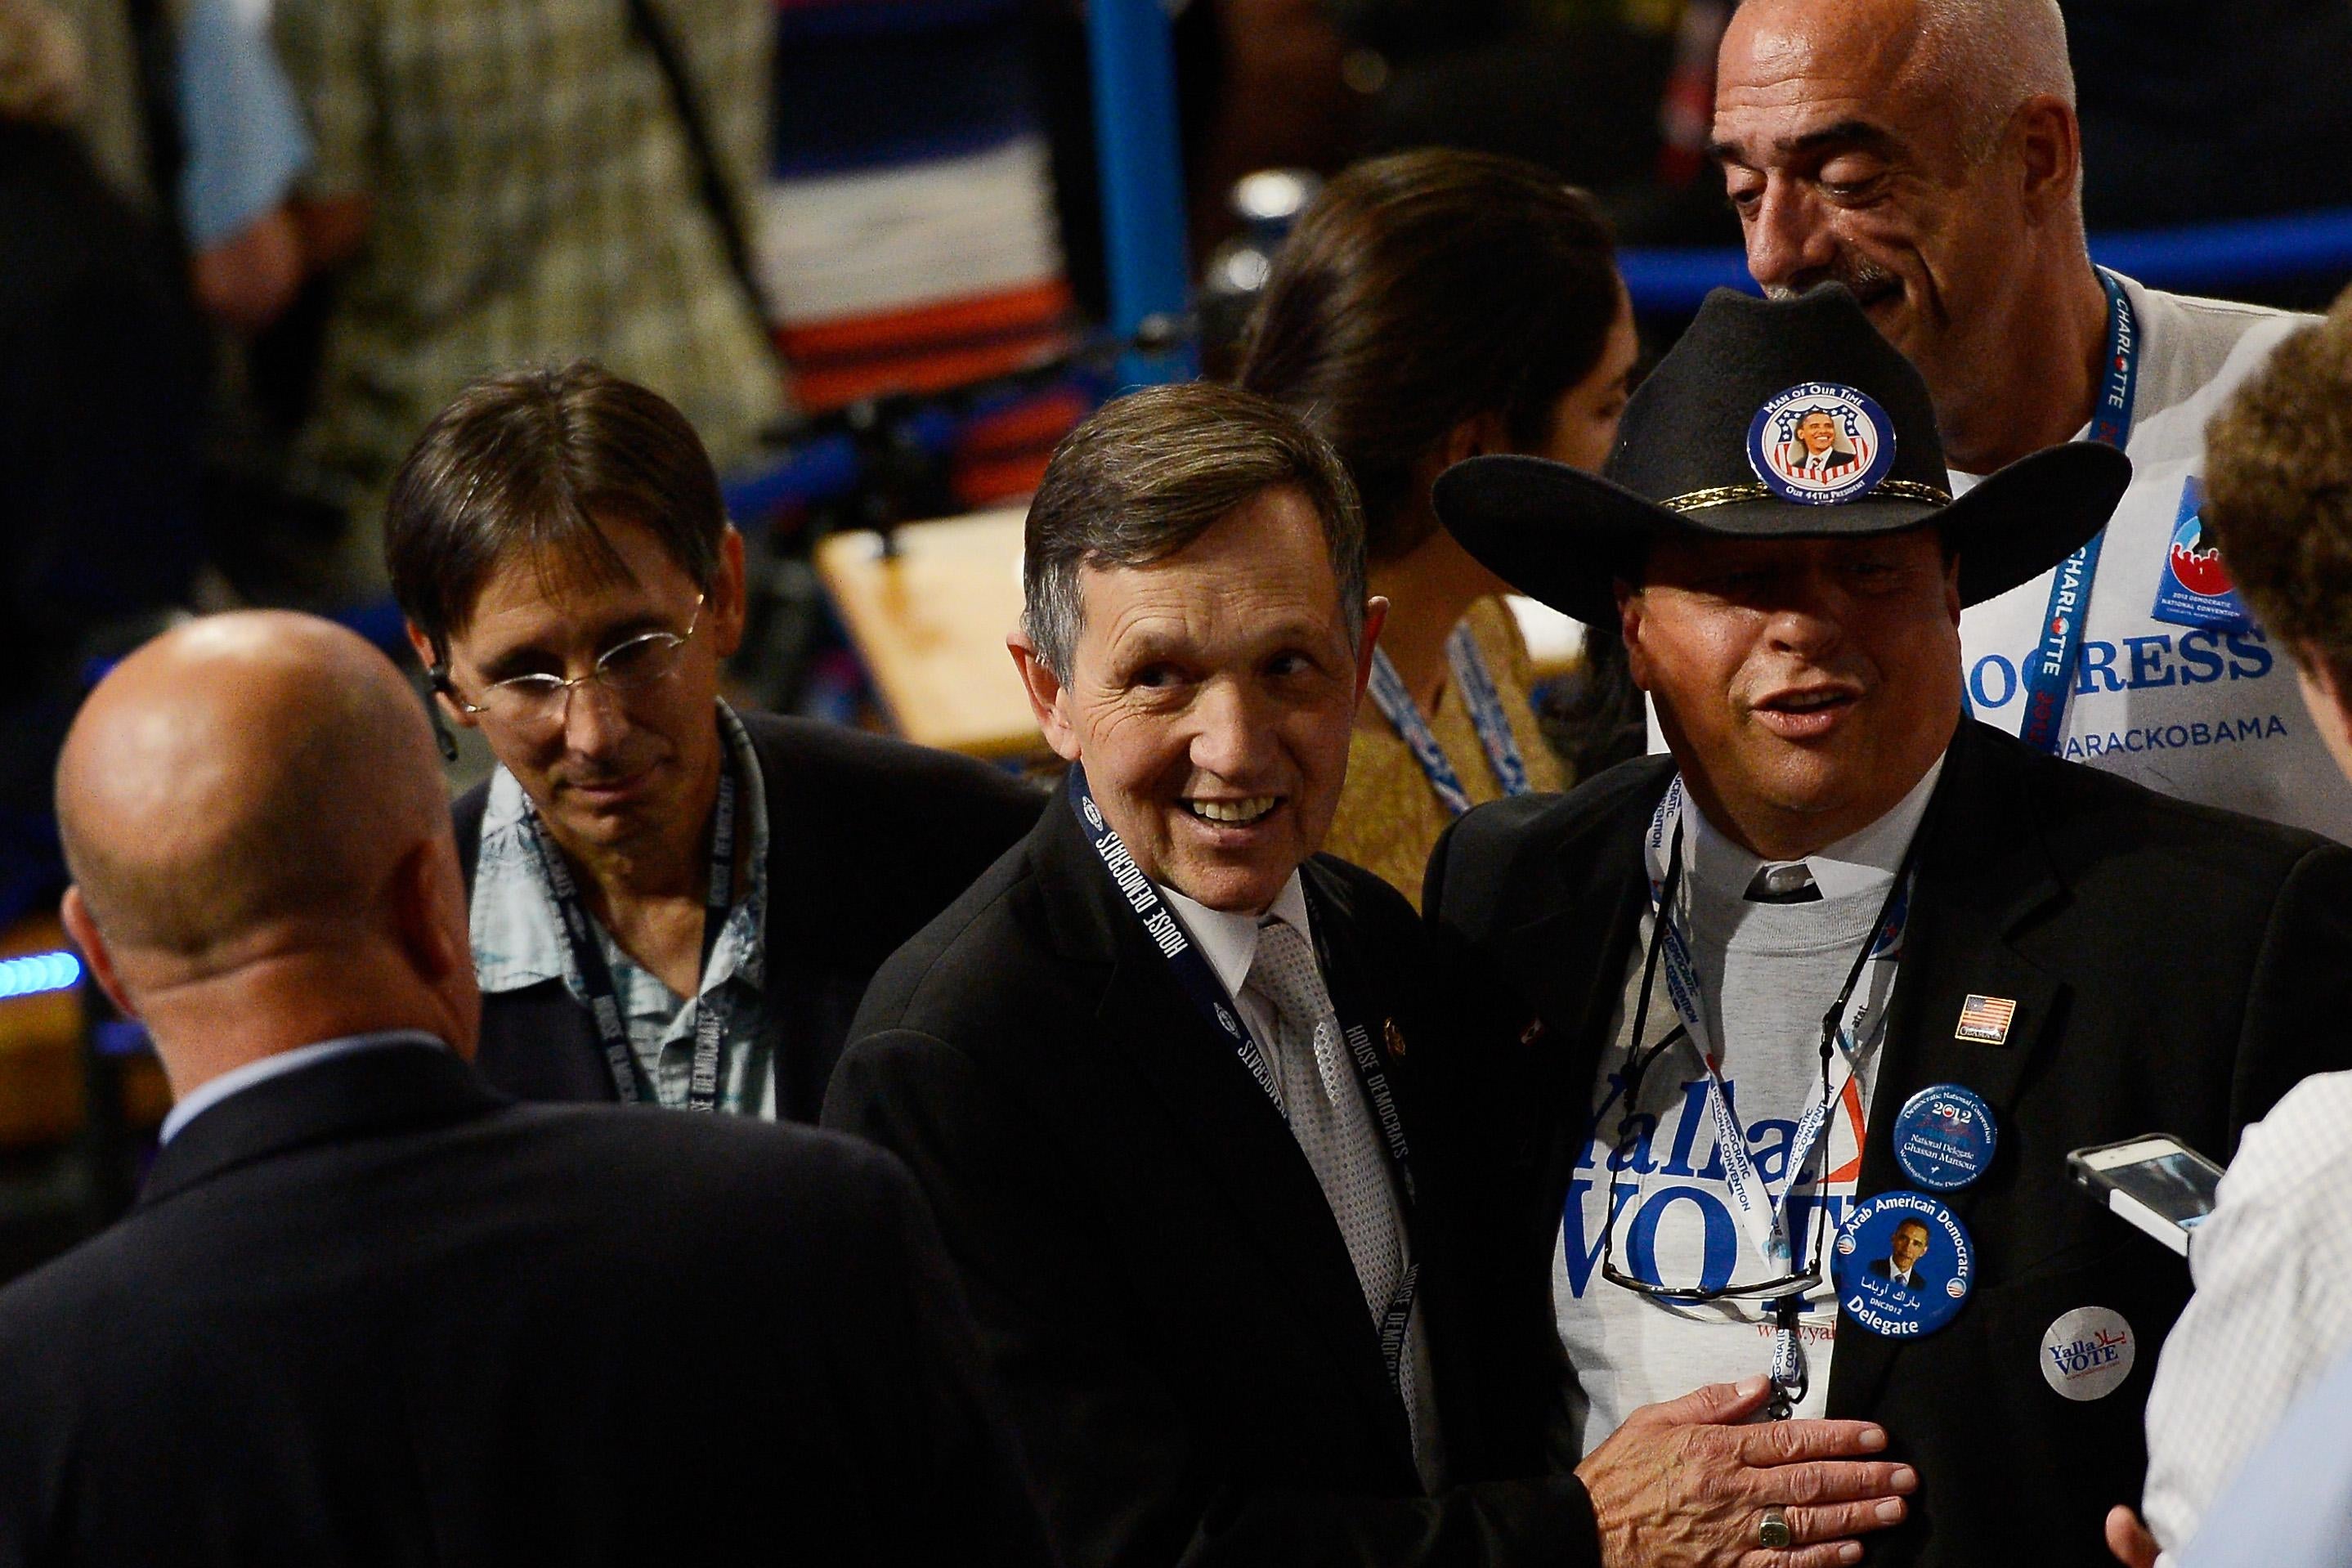 CHARLOTTE, NC - SEPTEMBER 05:  U.S. Rep. Dennis Kucinich (D-OH) meets with with Gus Mansour (R)during day two of the Democratic National Convention at Time Warner Cable Arena on September 5, 2012 in Charlotte, North Carolina. The DNC that will run through September 7, will nominate U.S. President Barack Obama as the Democratic presidential candidate.  (Photo by Kevork Djansezian/Getty Images)